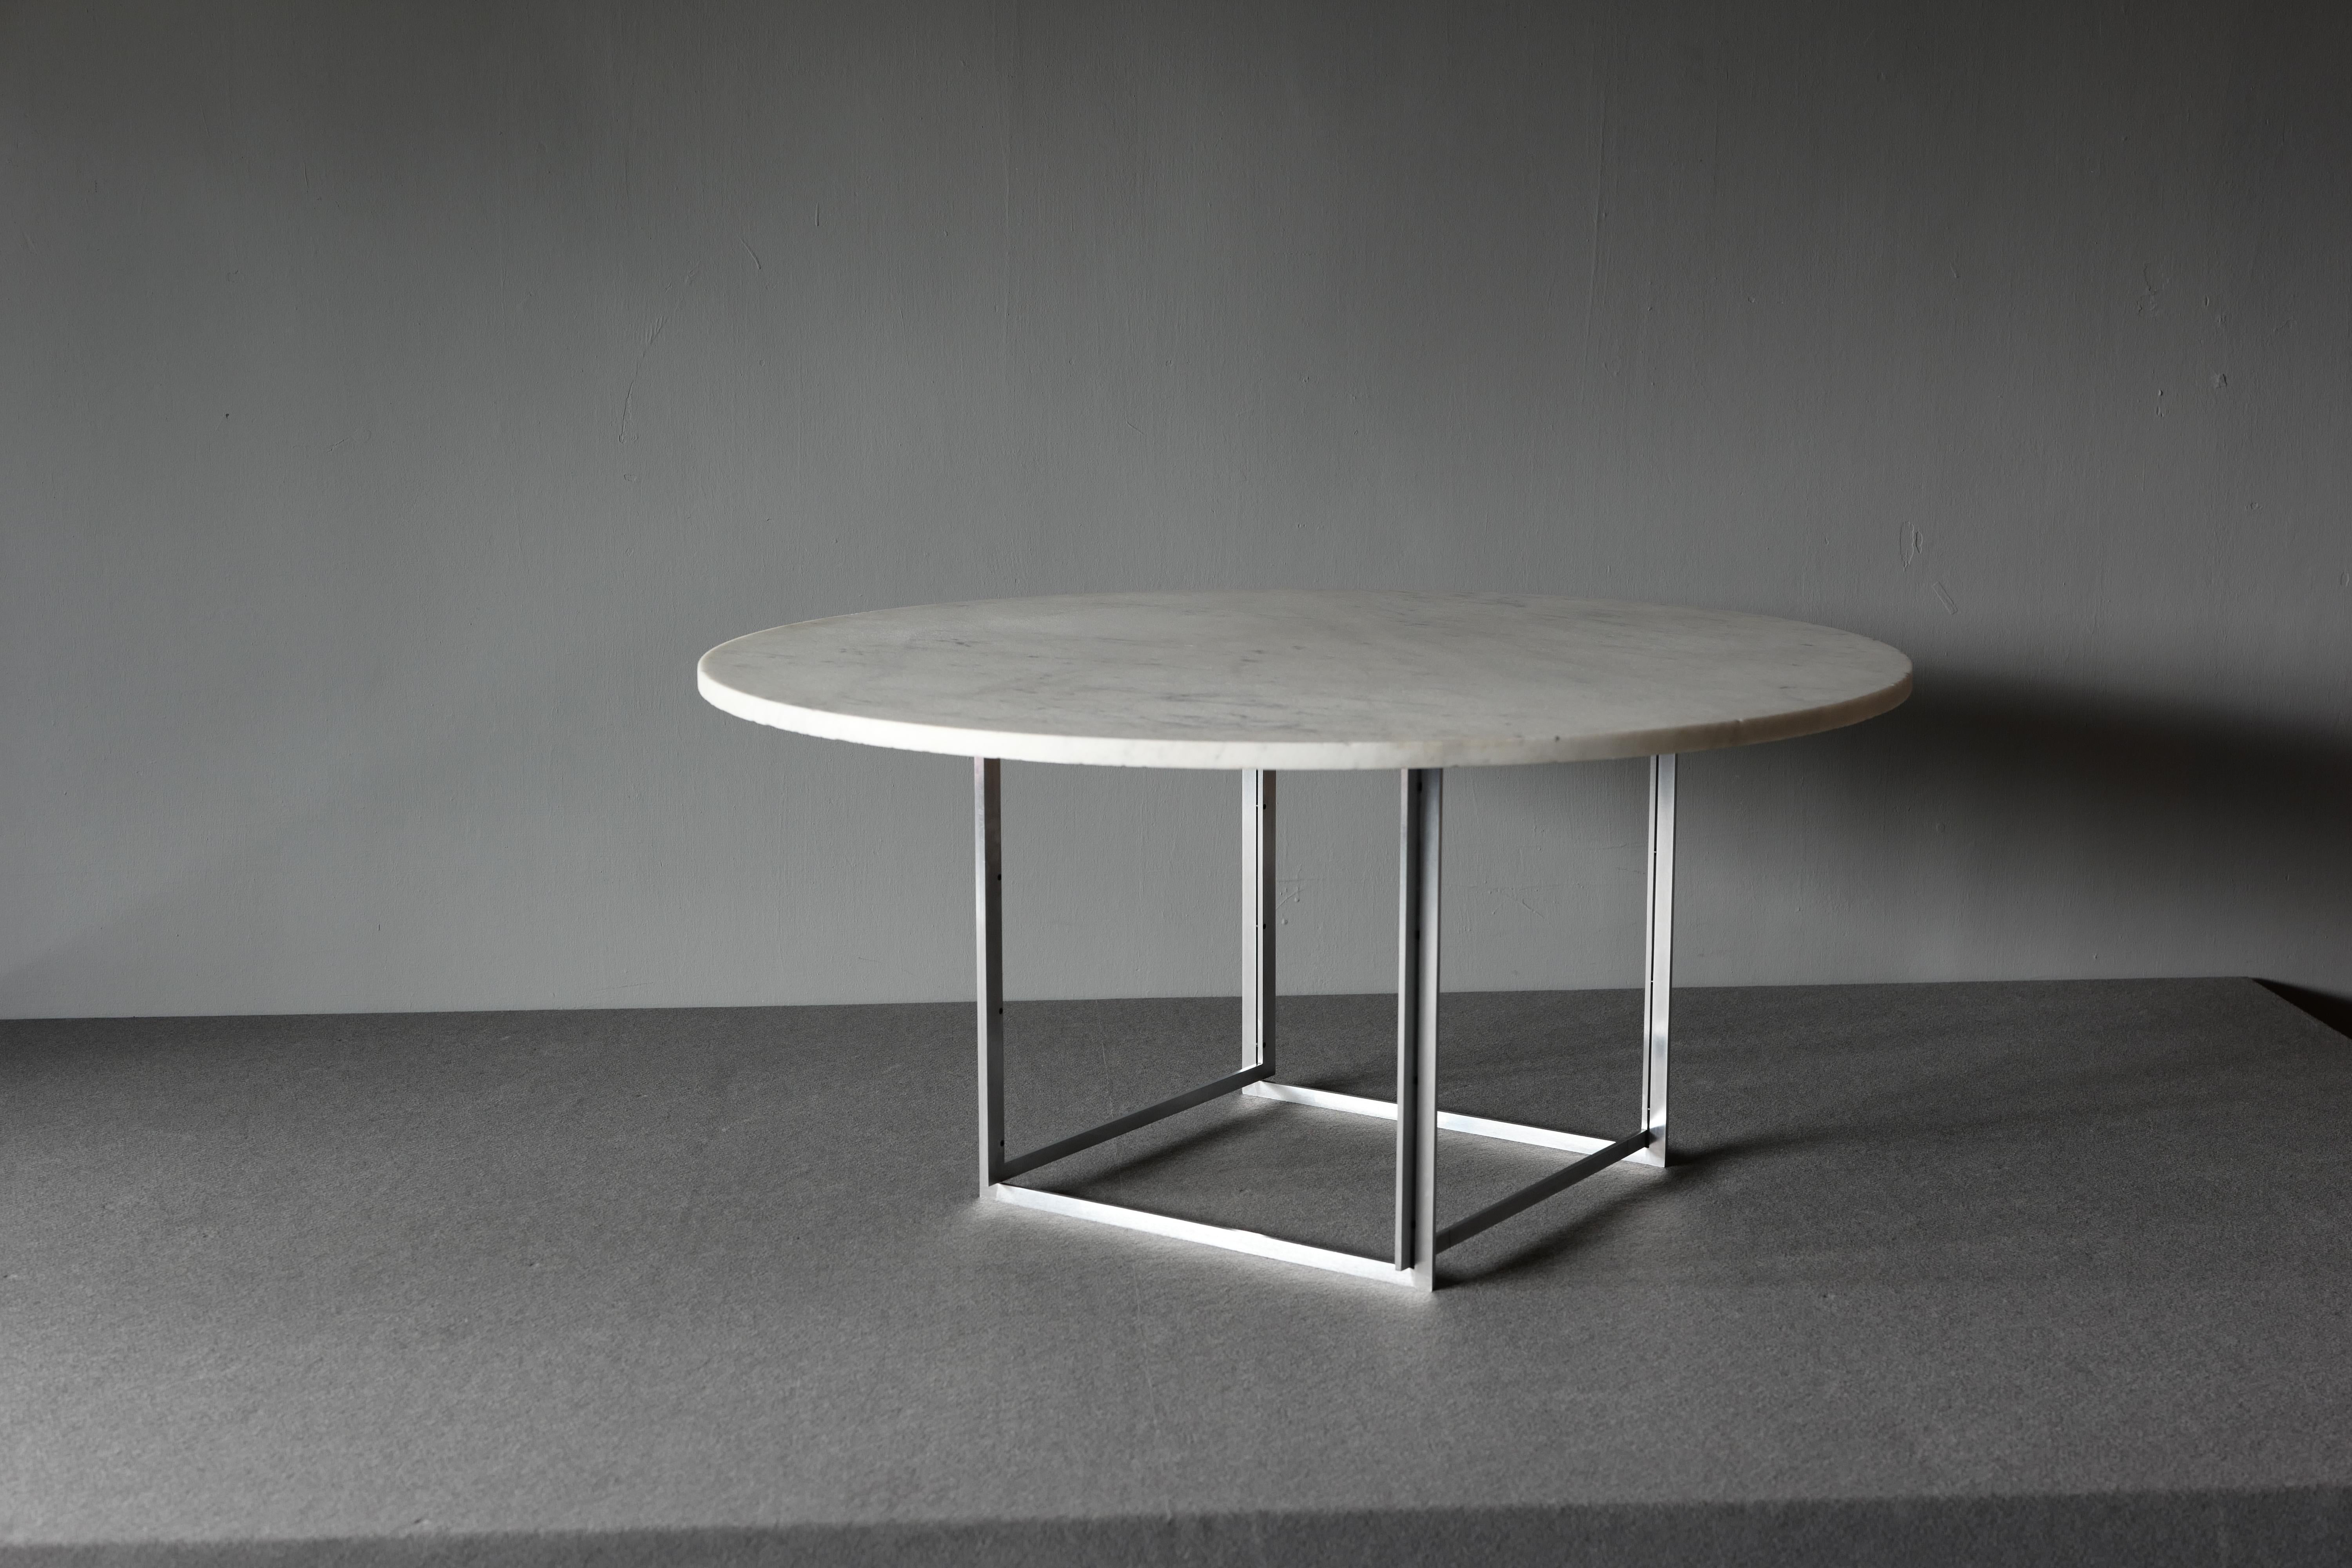 Amazing dining table by Poul Kjaerholm “PK 54”. This iconic dining table has a cubes frame of steel with a circular top of flint rolled light grey marble. It was designed in 1963. This particular one was manufactured 1960s–1970s by E. Kold